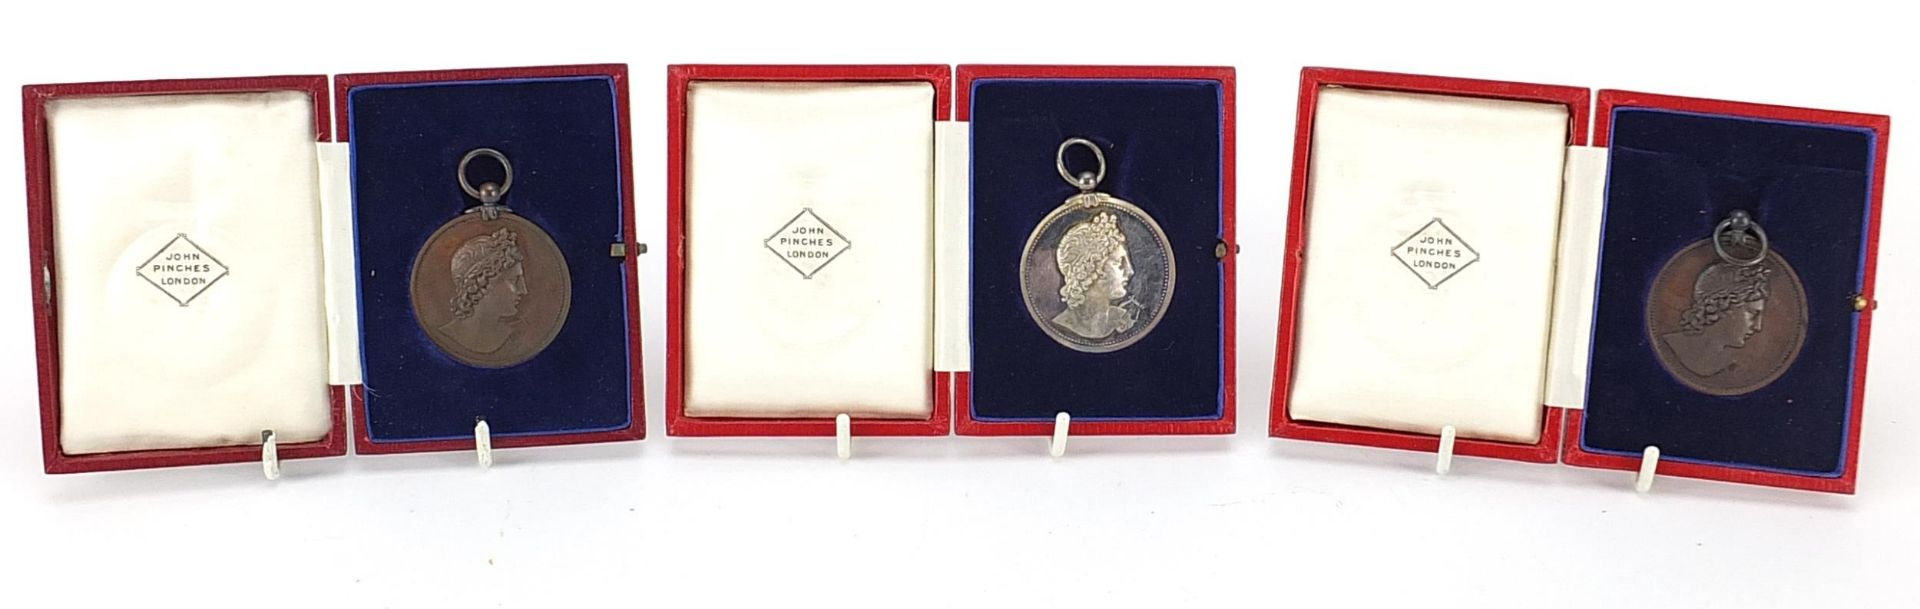 Three John Pinches London Royal Academy of Music medals for Rosalind Bentley housed in velvet